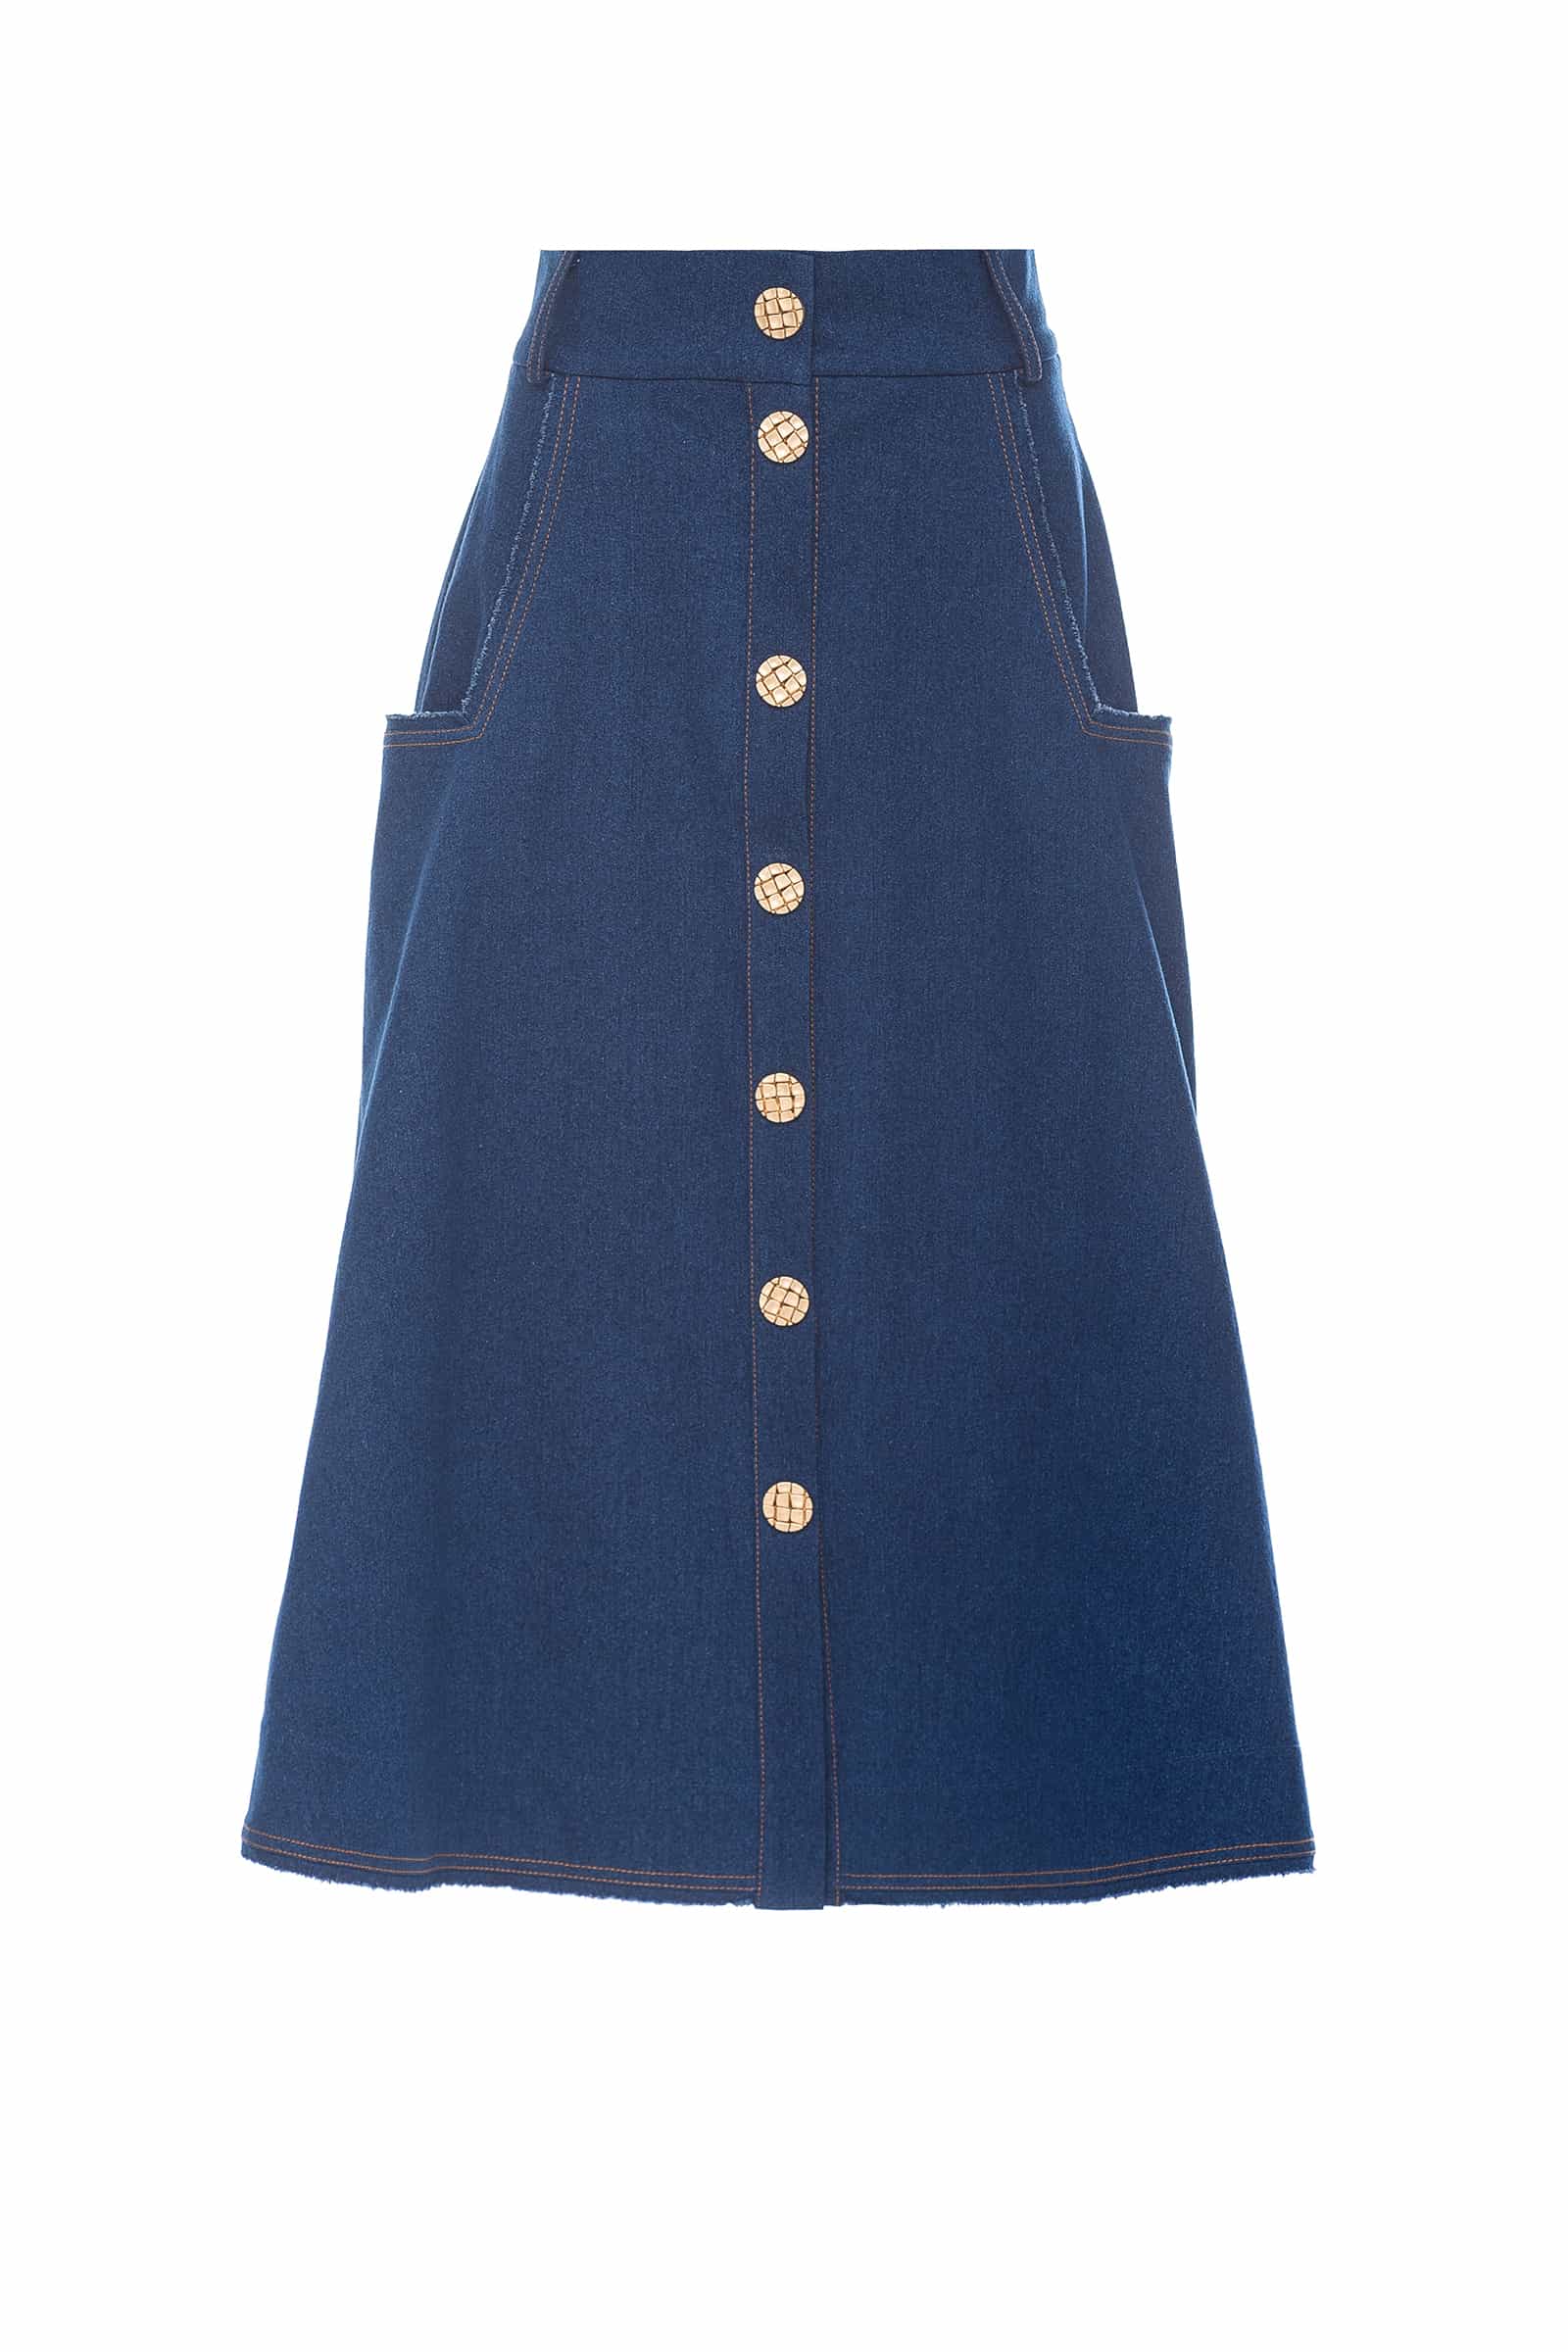 Denim skirt fastened at the front with buttons